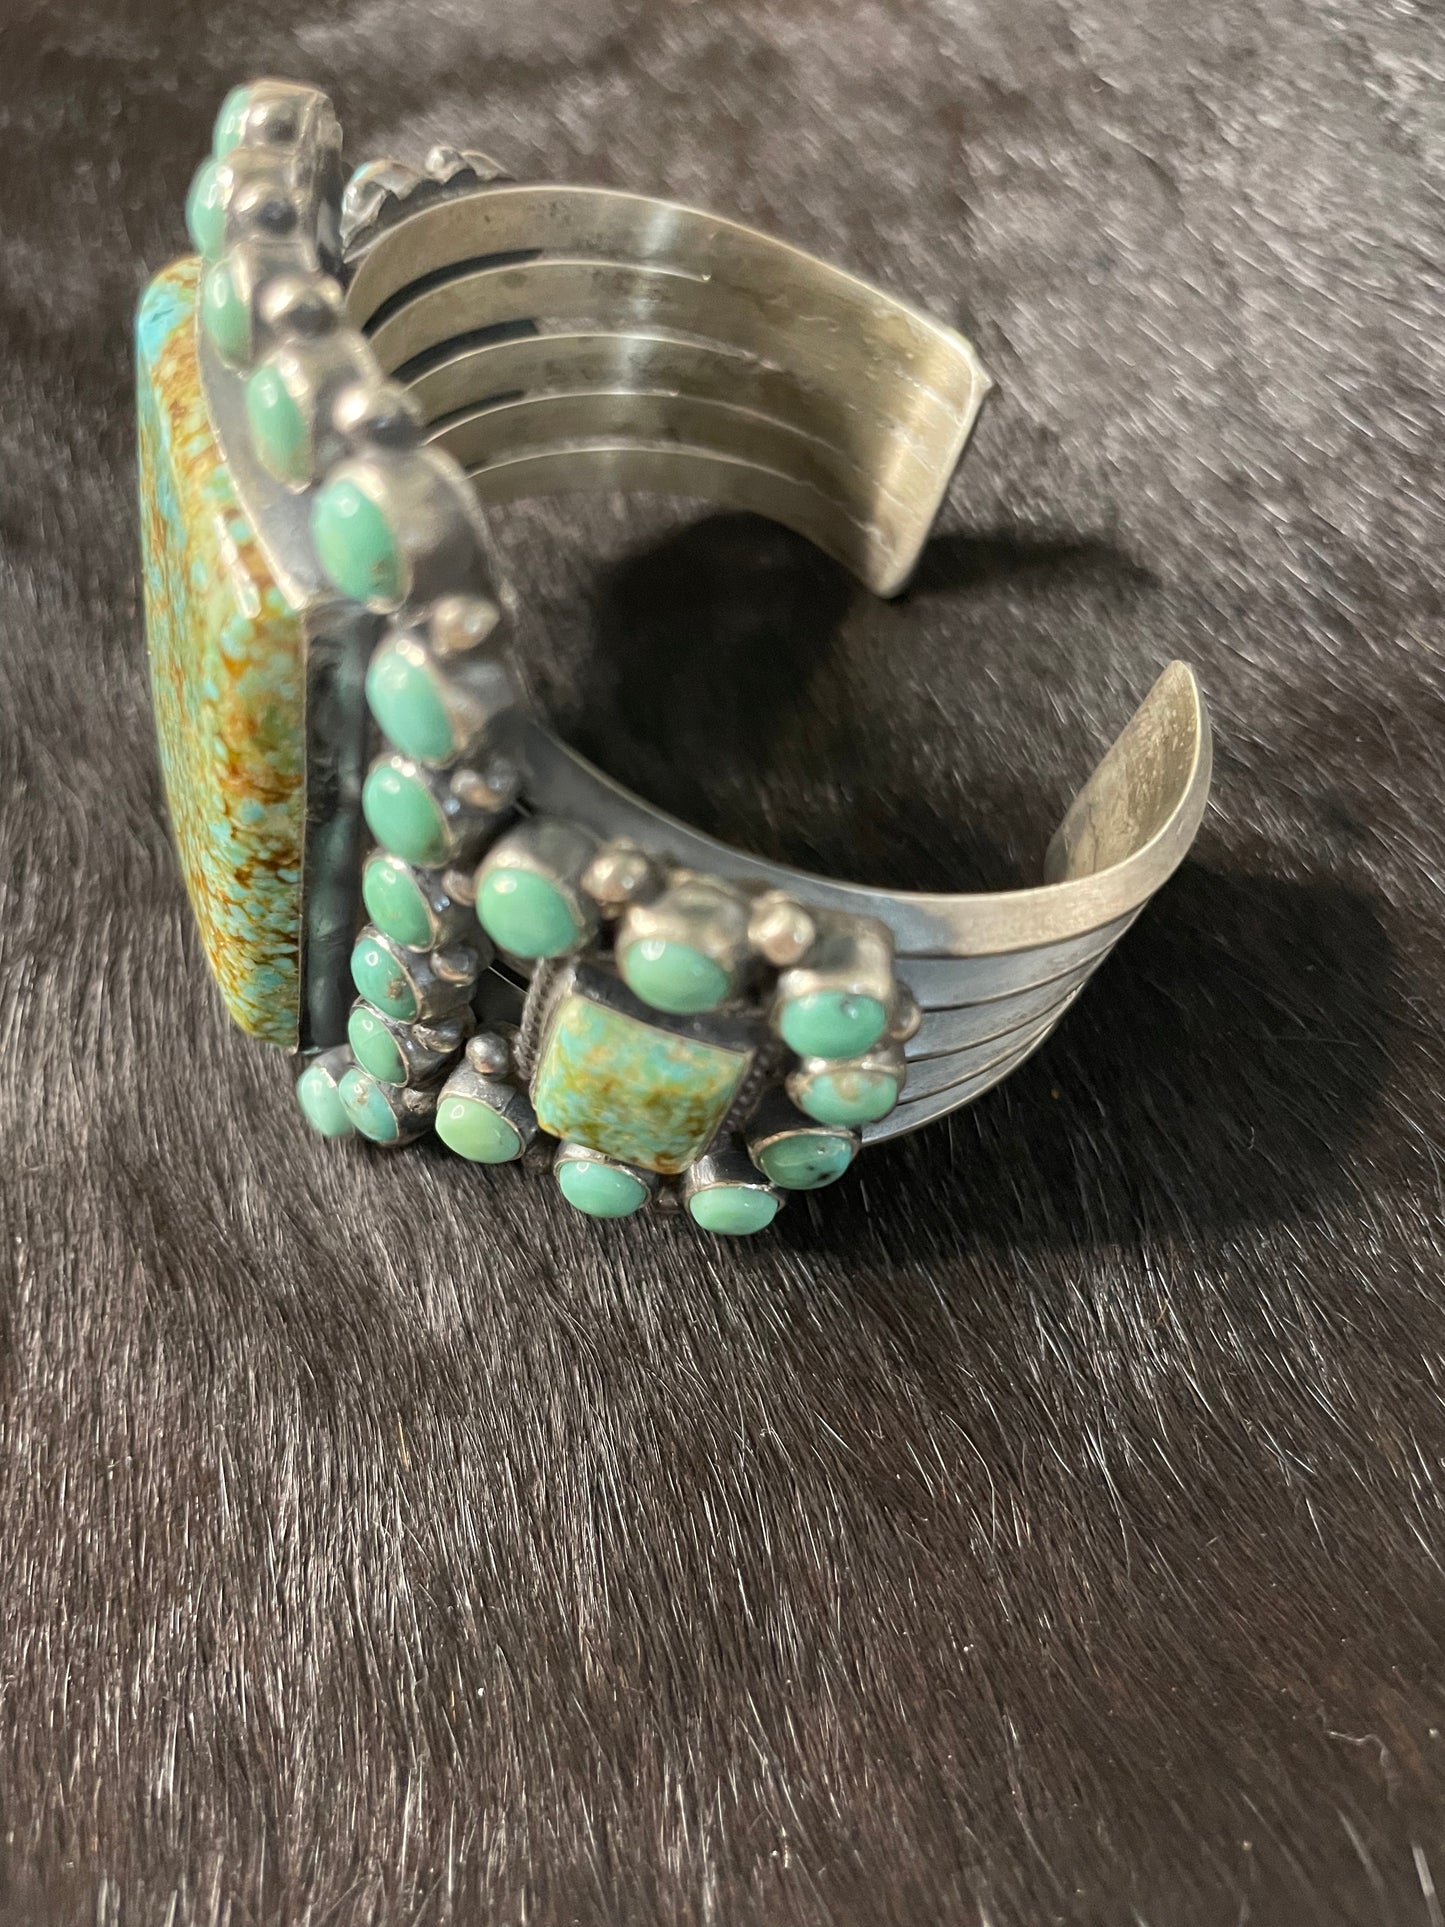 Anthony Skeets Navajo Turquoise & Sterling Silver Cuff Bracelet Signed